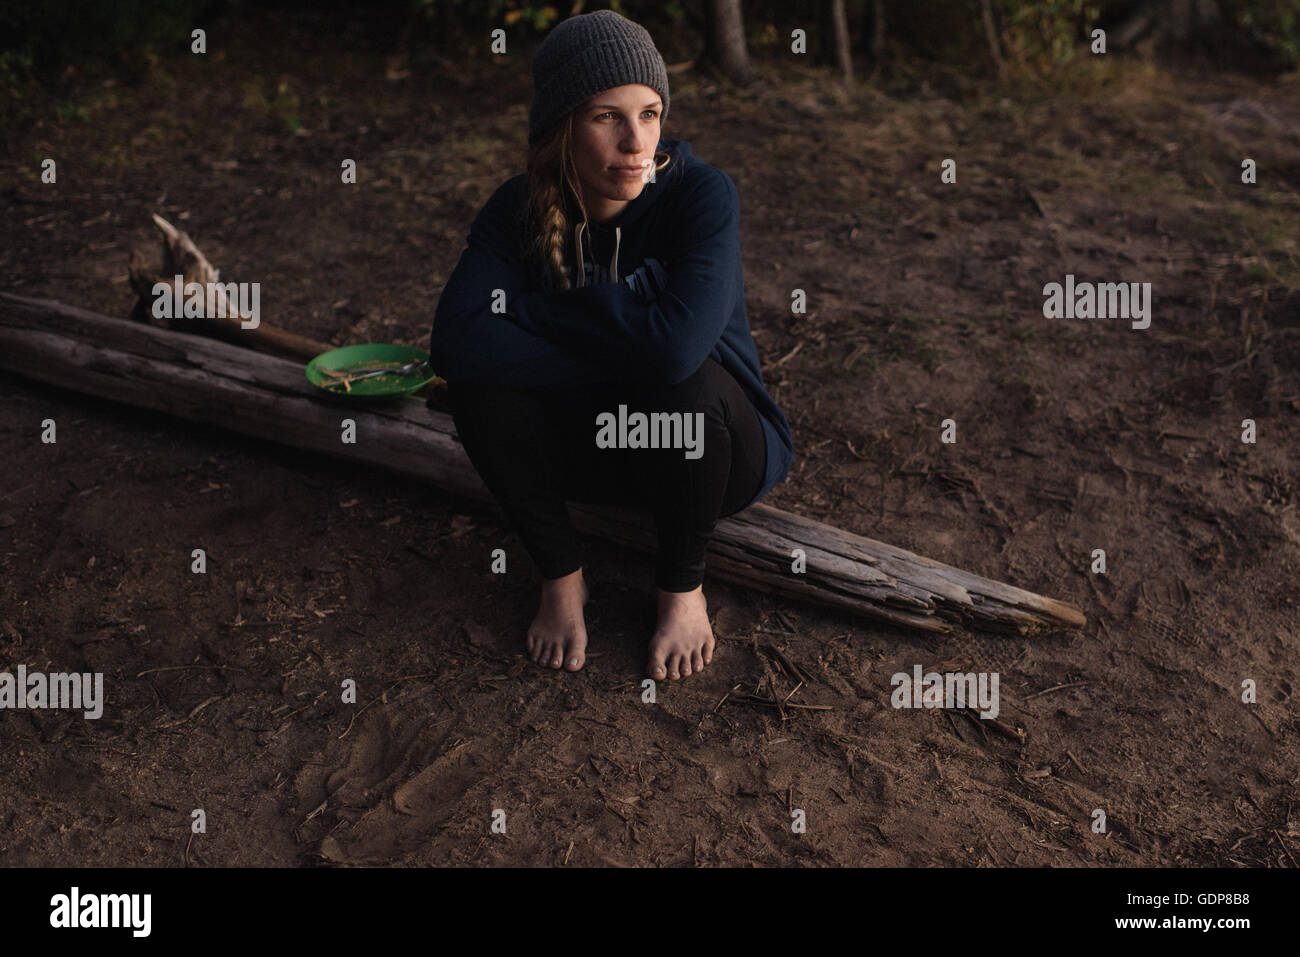 Mid adult woman sitting on wood in forest, looking away Stock Photo